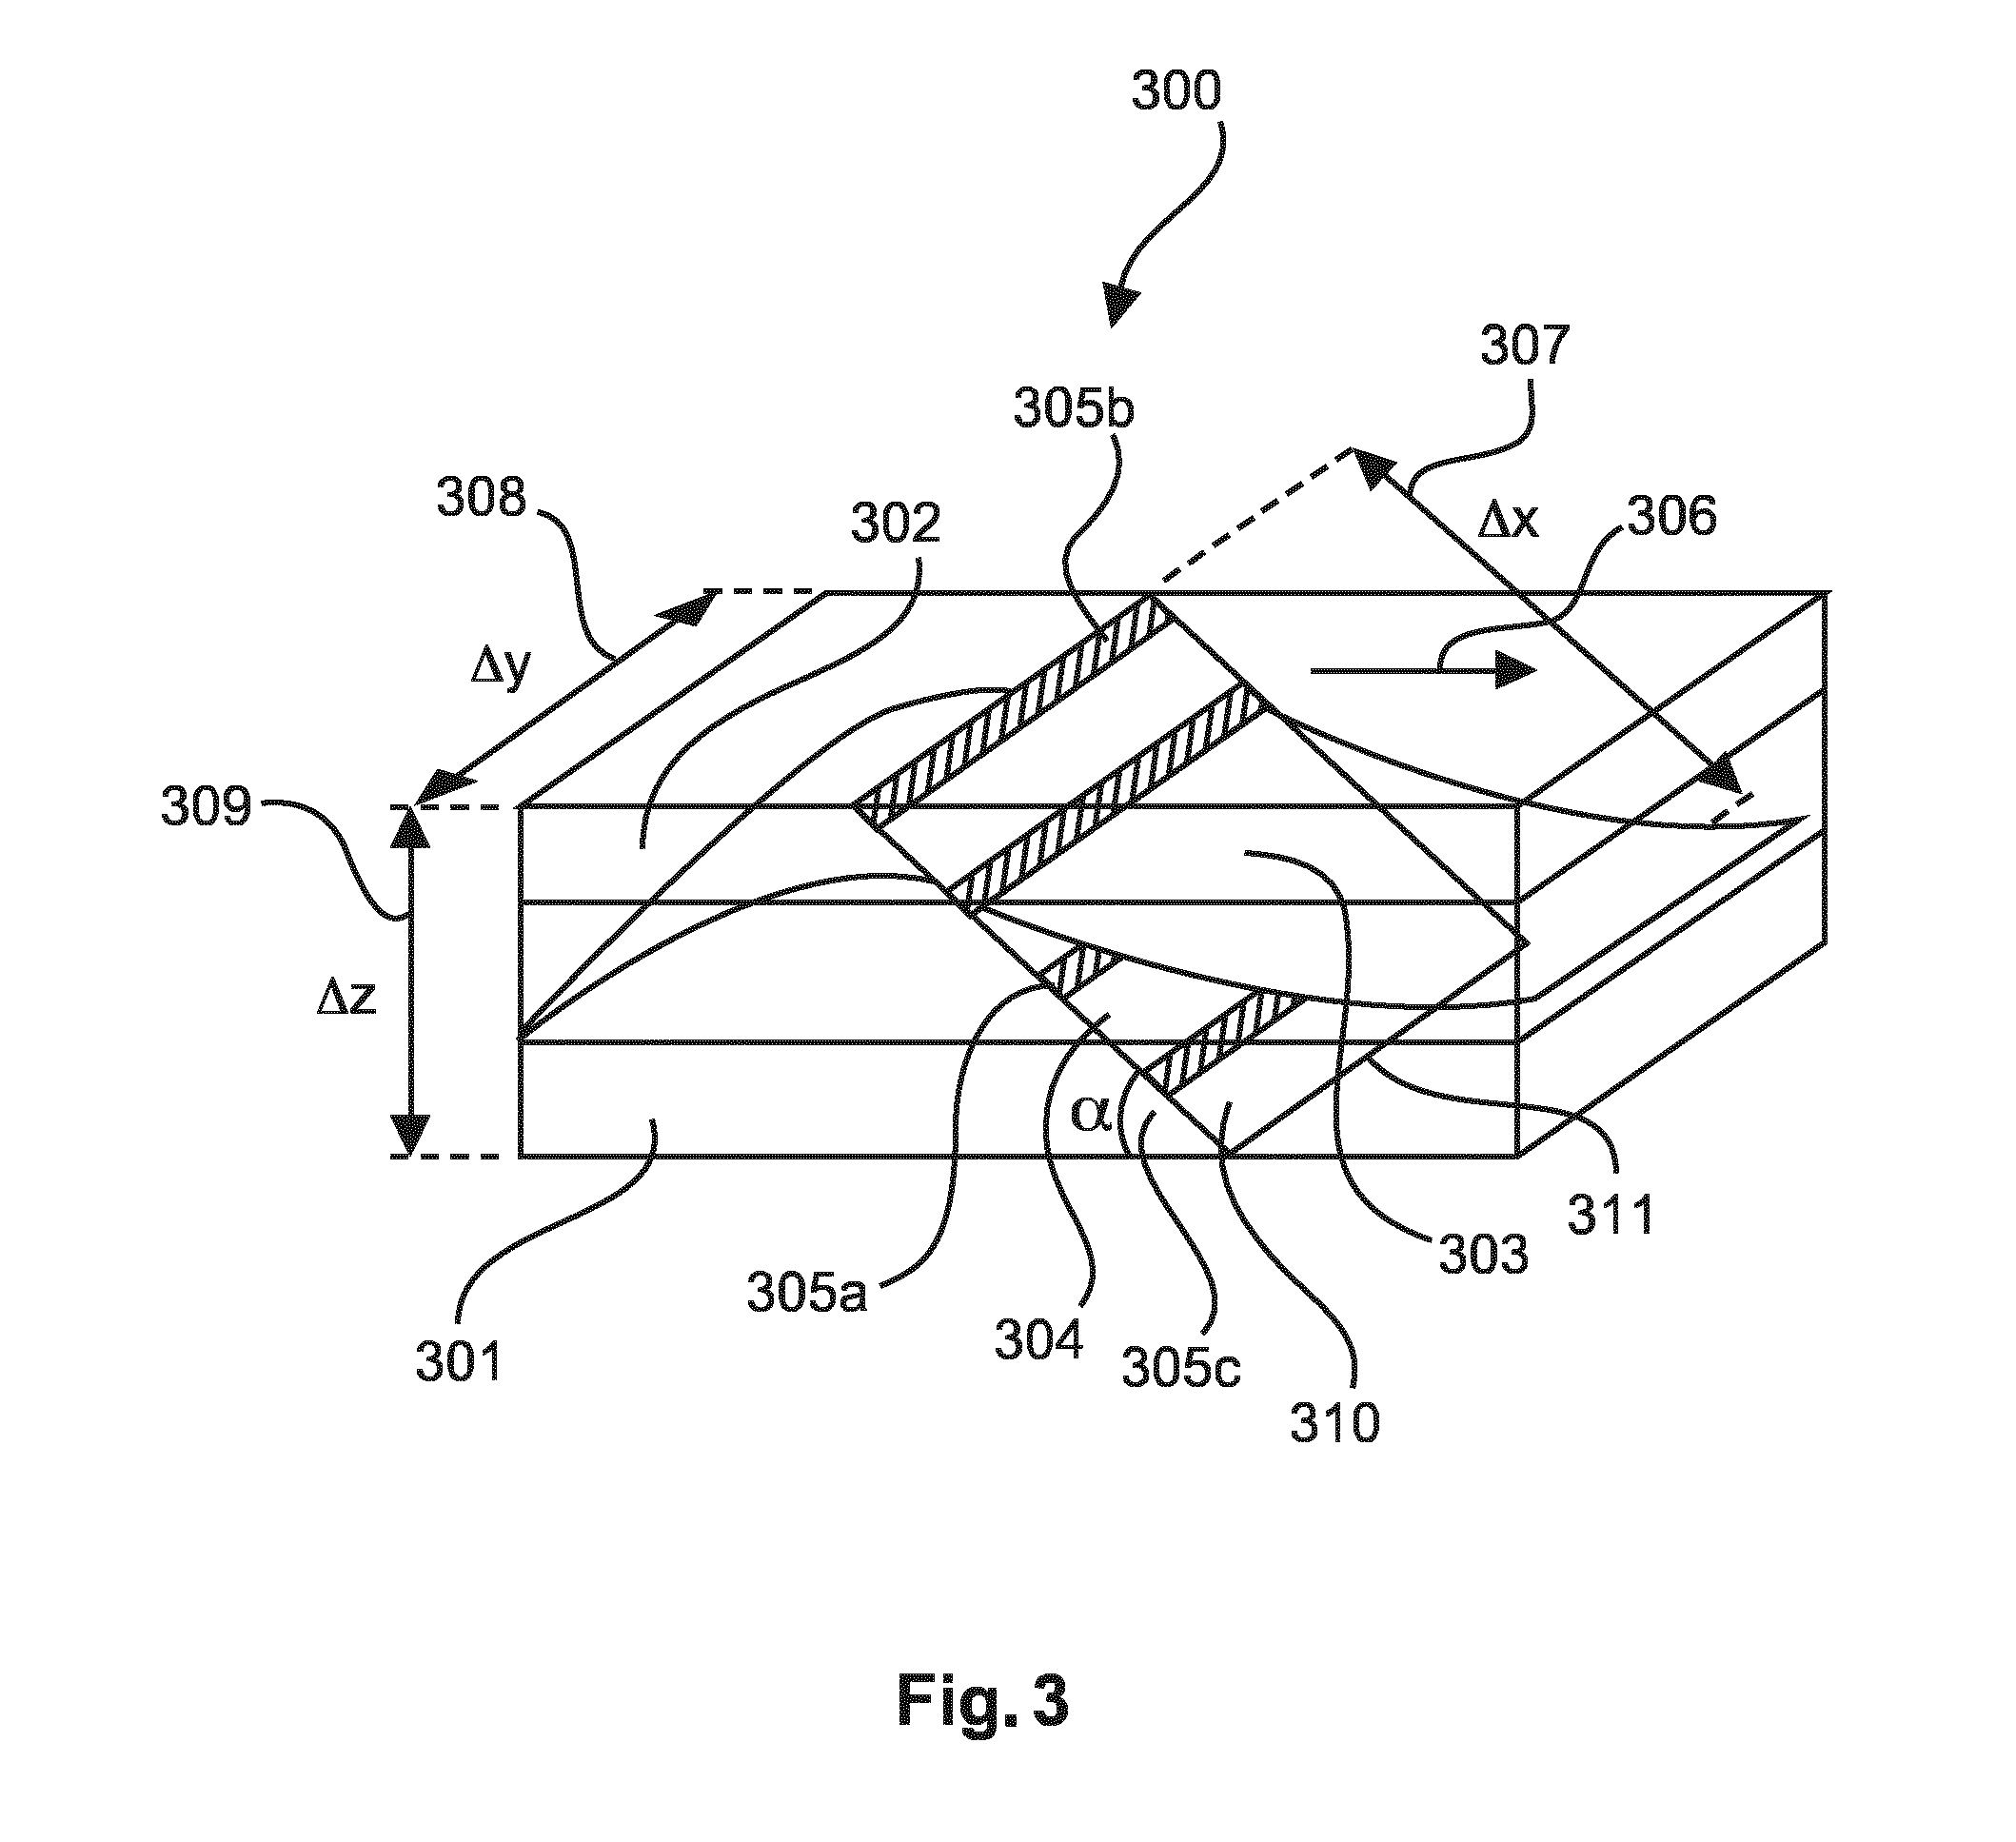 Scanning imaging system with a novel imaging sensor with gaps for electronic circuitry